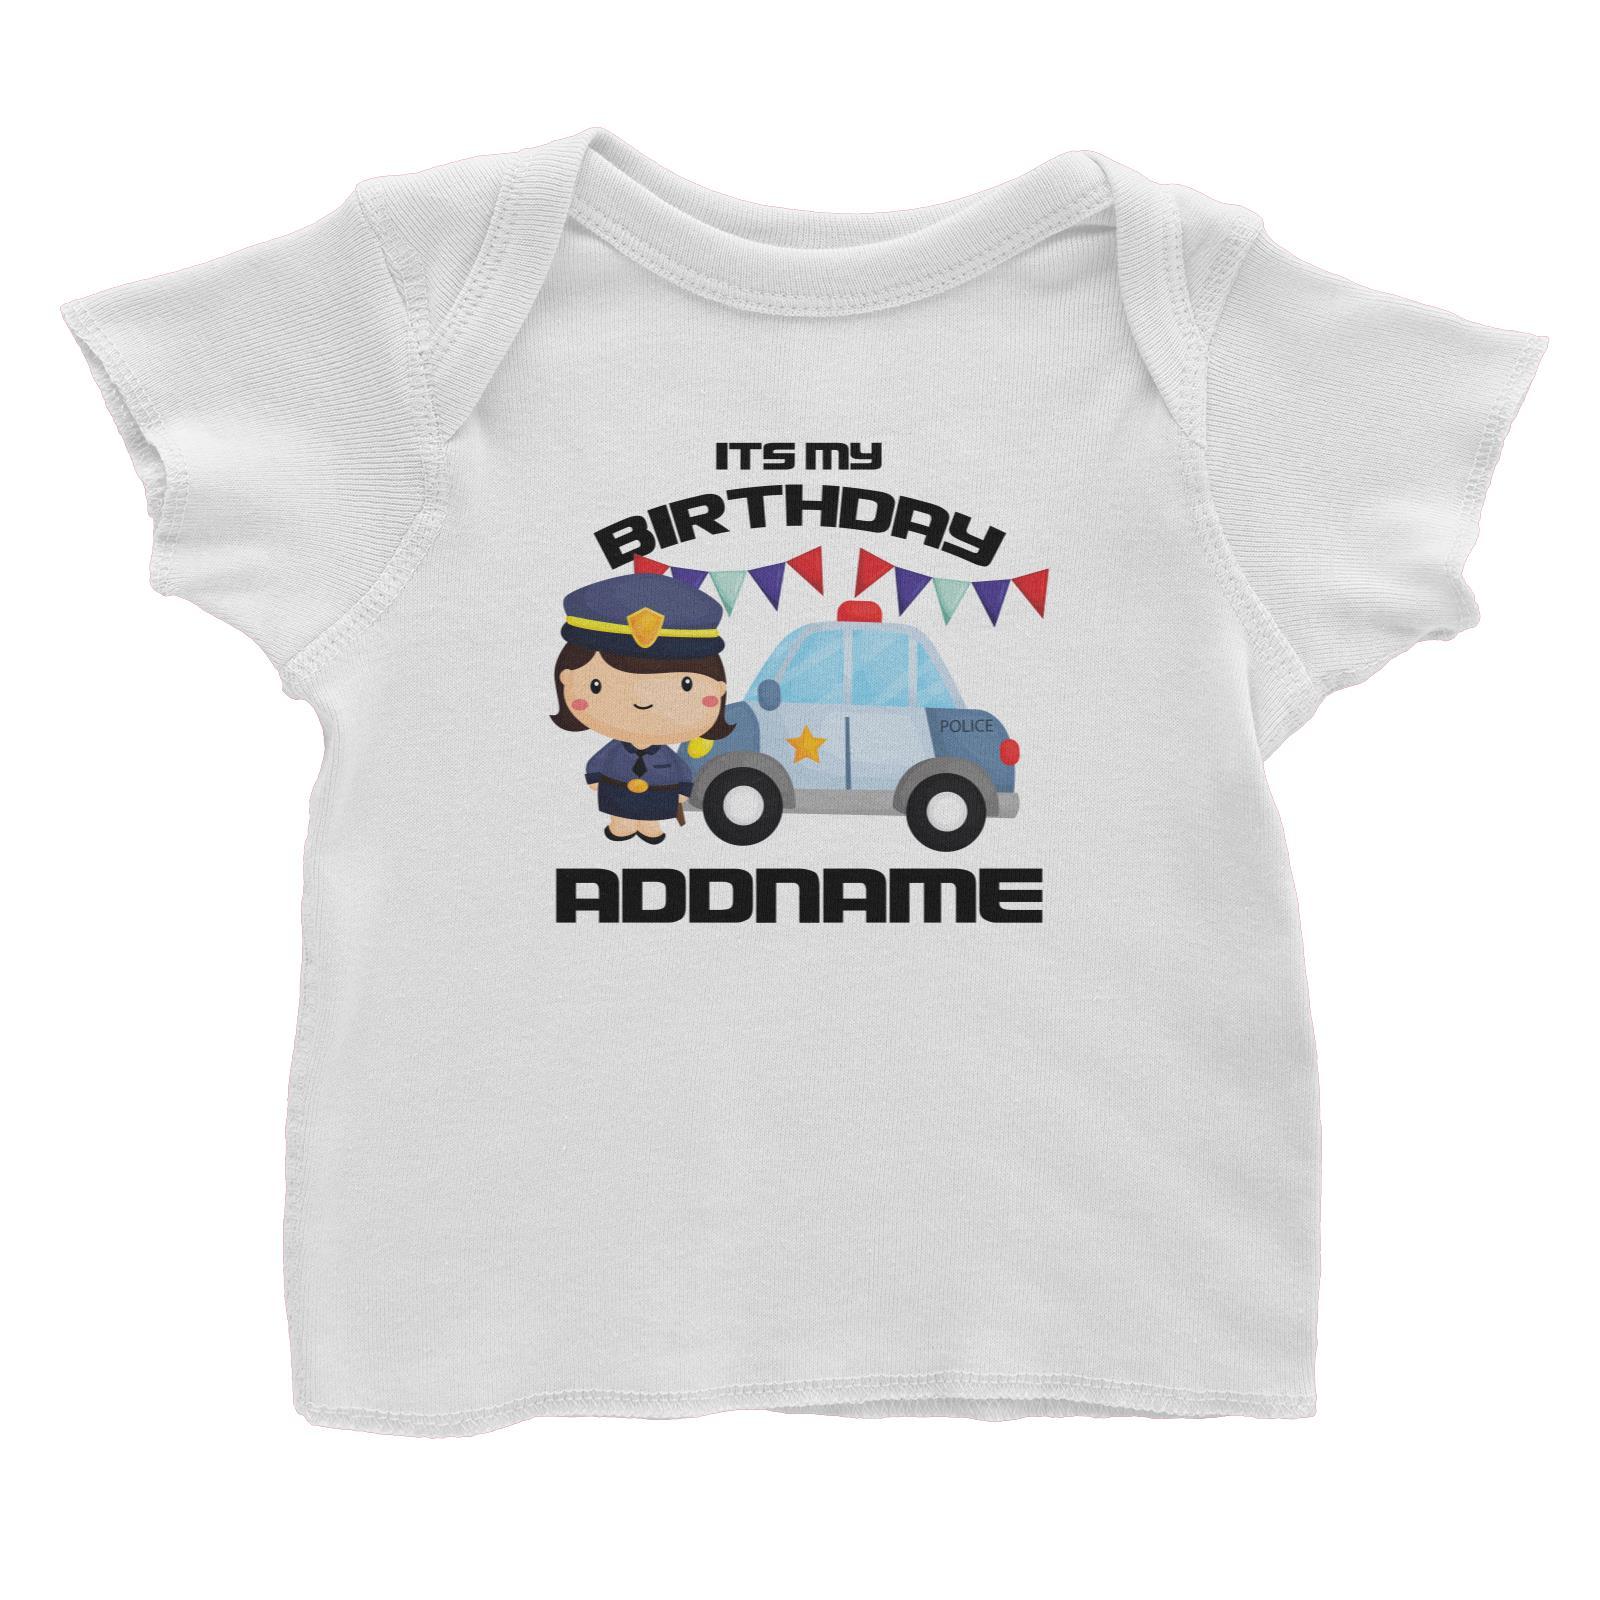 Birthday Police Officer Girl In Suit With Police Car Its My Birthday Addname Baby T-Shirt